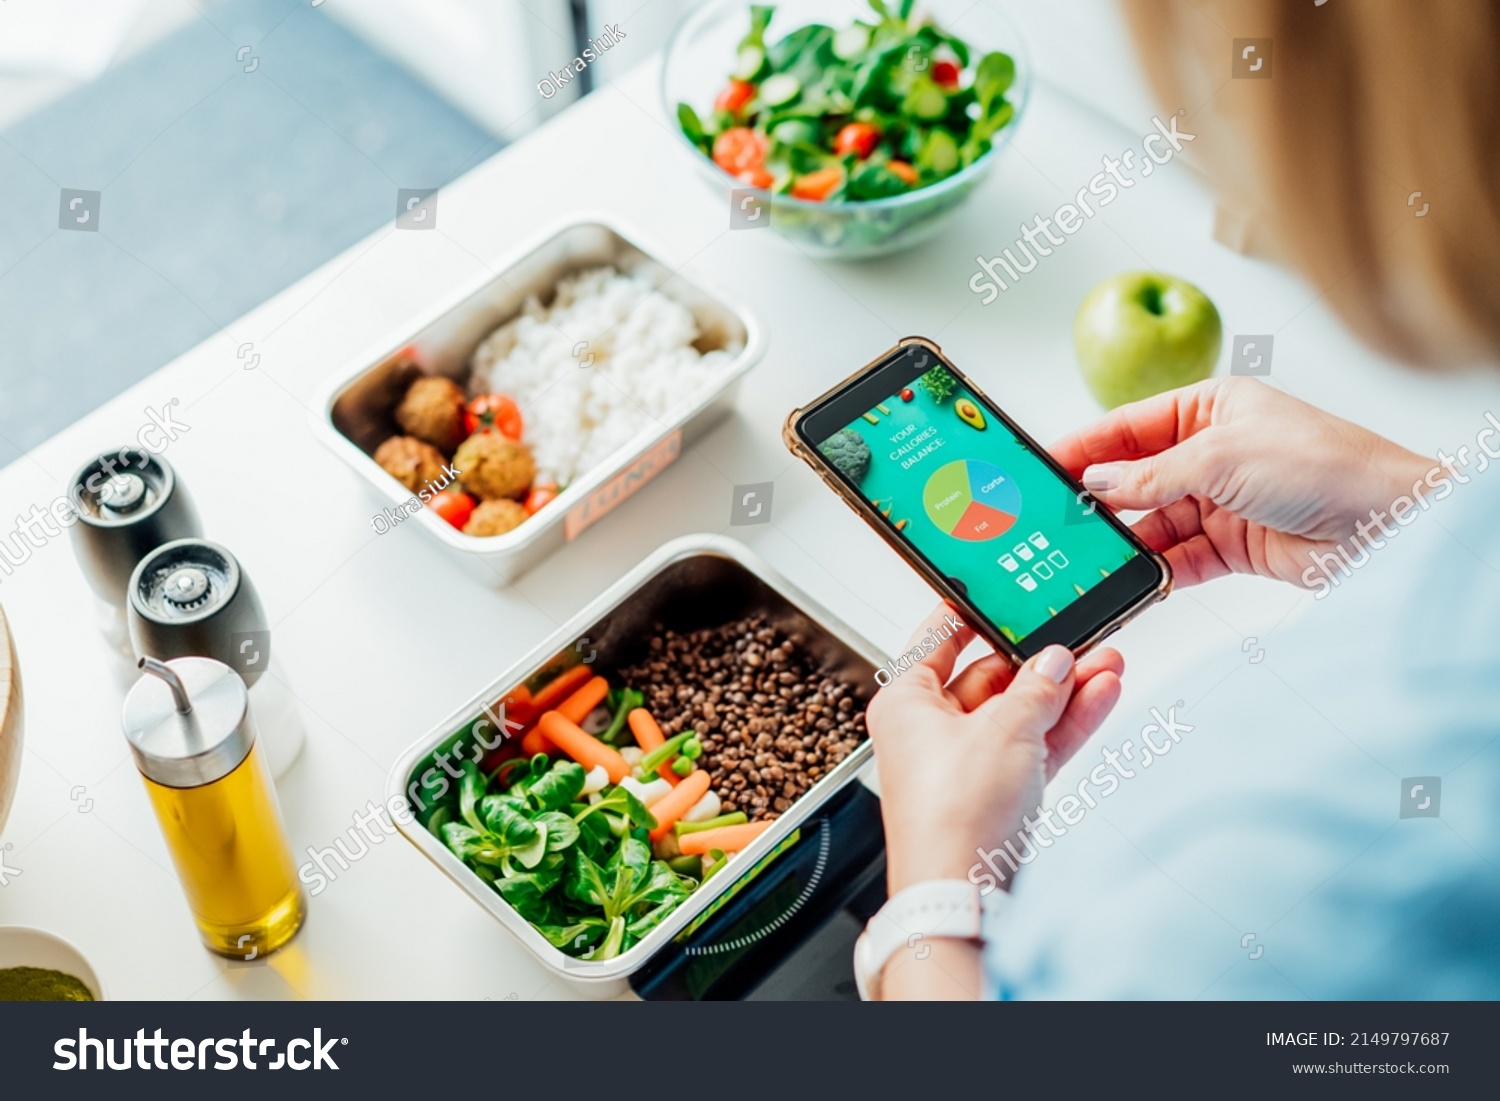 Healthy diet plan for weight loss, daily ready meal menu. Woman using meal tracker app on phone while weighing lunch box cooked in advance on kitchen scale. Balanced portion with dish. Pre-cooking #2149797687